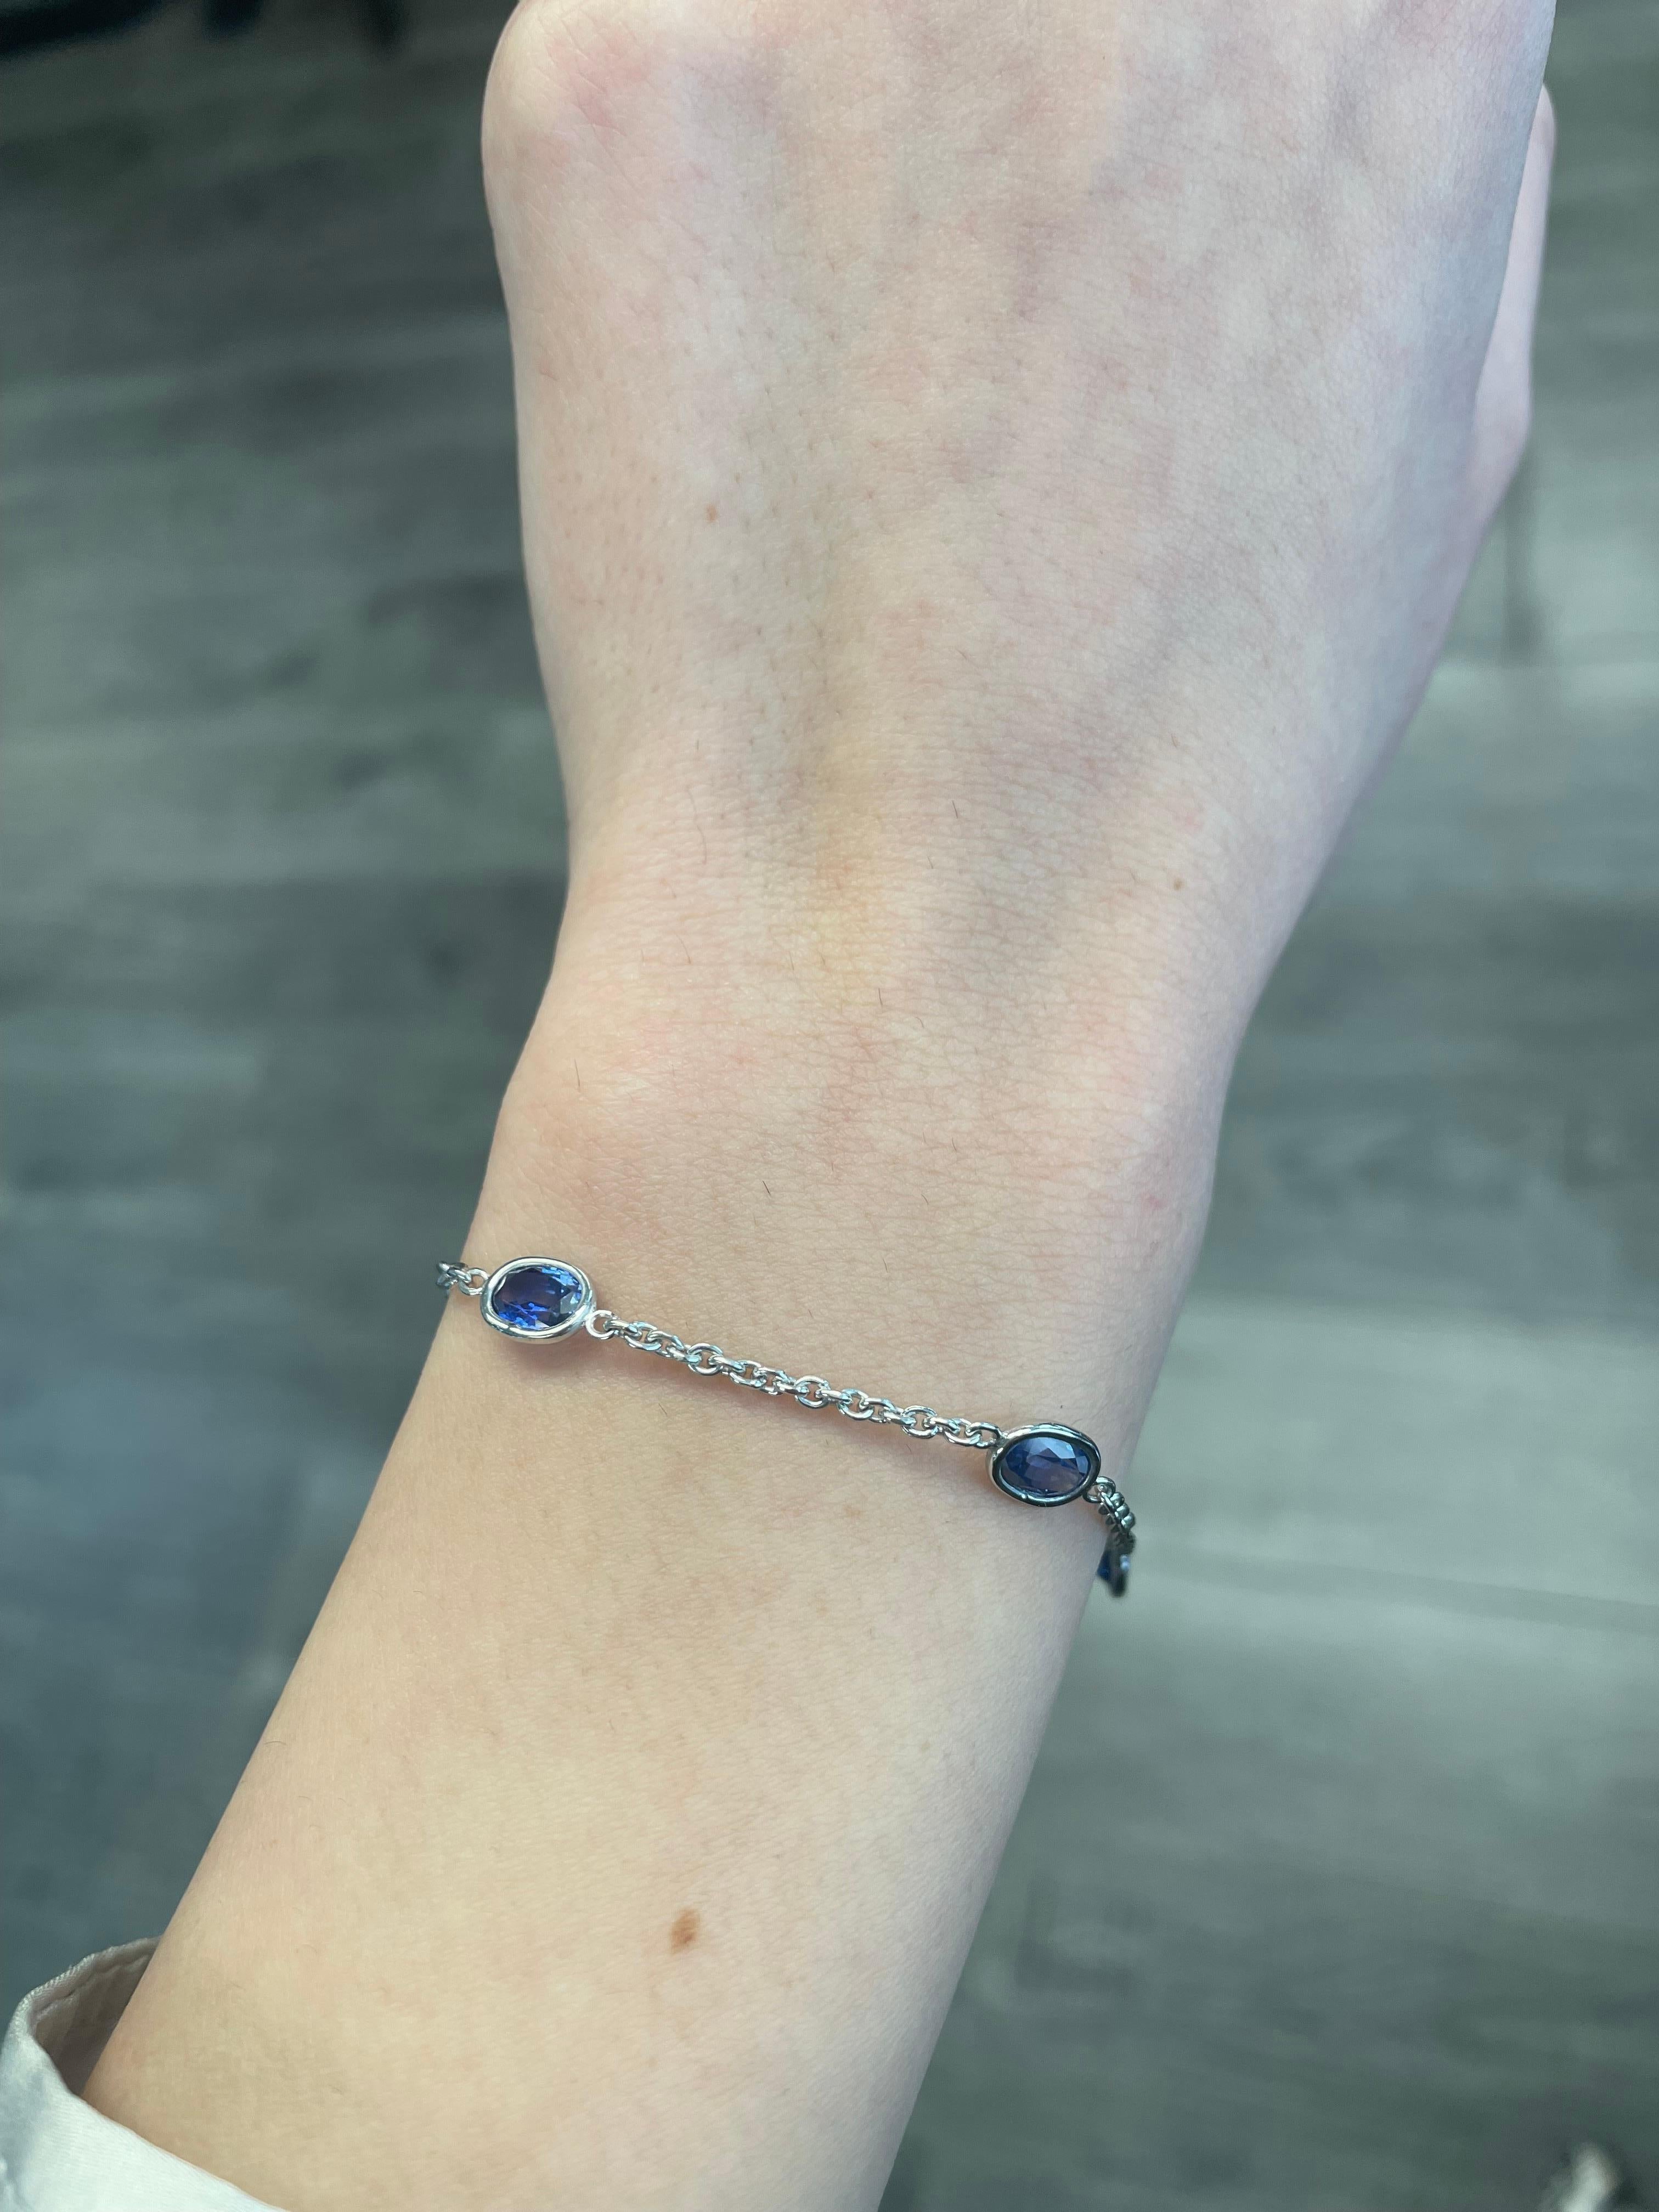 Exquisite sapphires by the yard modern bracelet. By Alexander Beverly Hills.
5 oval sapphires, 4.76 carats, heat. Hand made bezel set in 18k white gold. 
Accommodated with an up to date appraisal by a GIA G.G. upon request. please contact us with